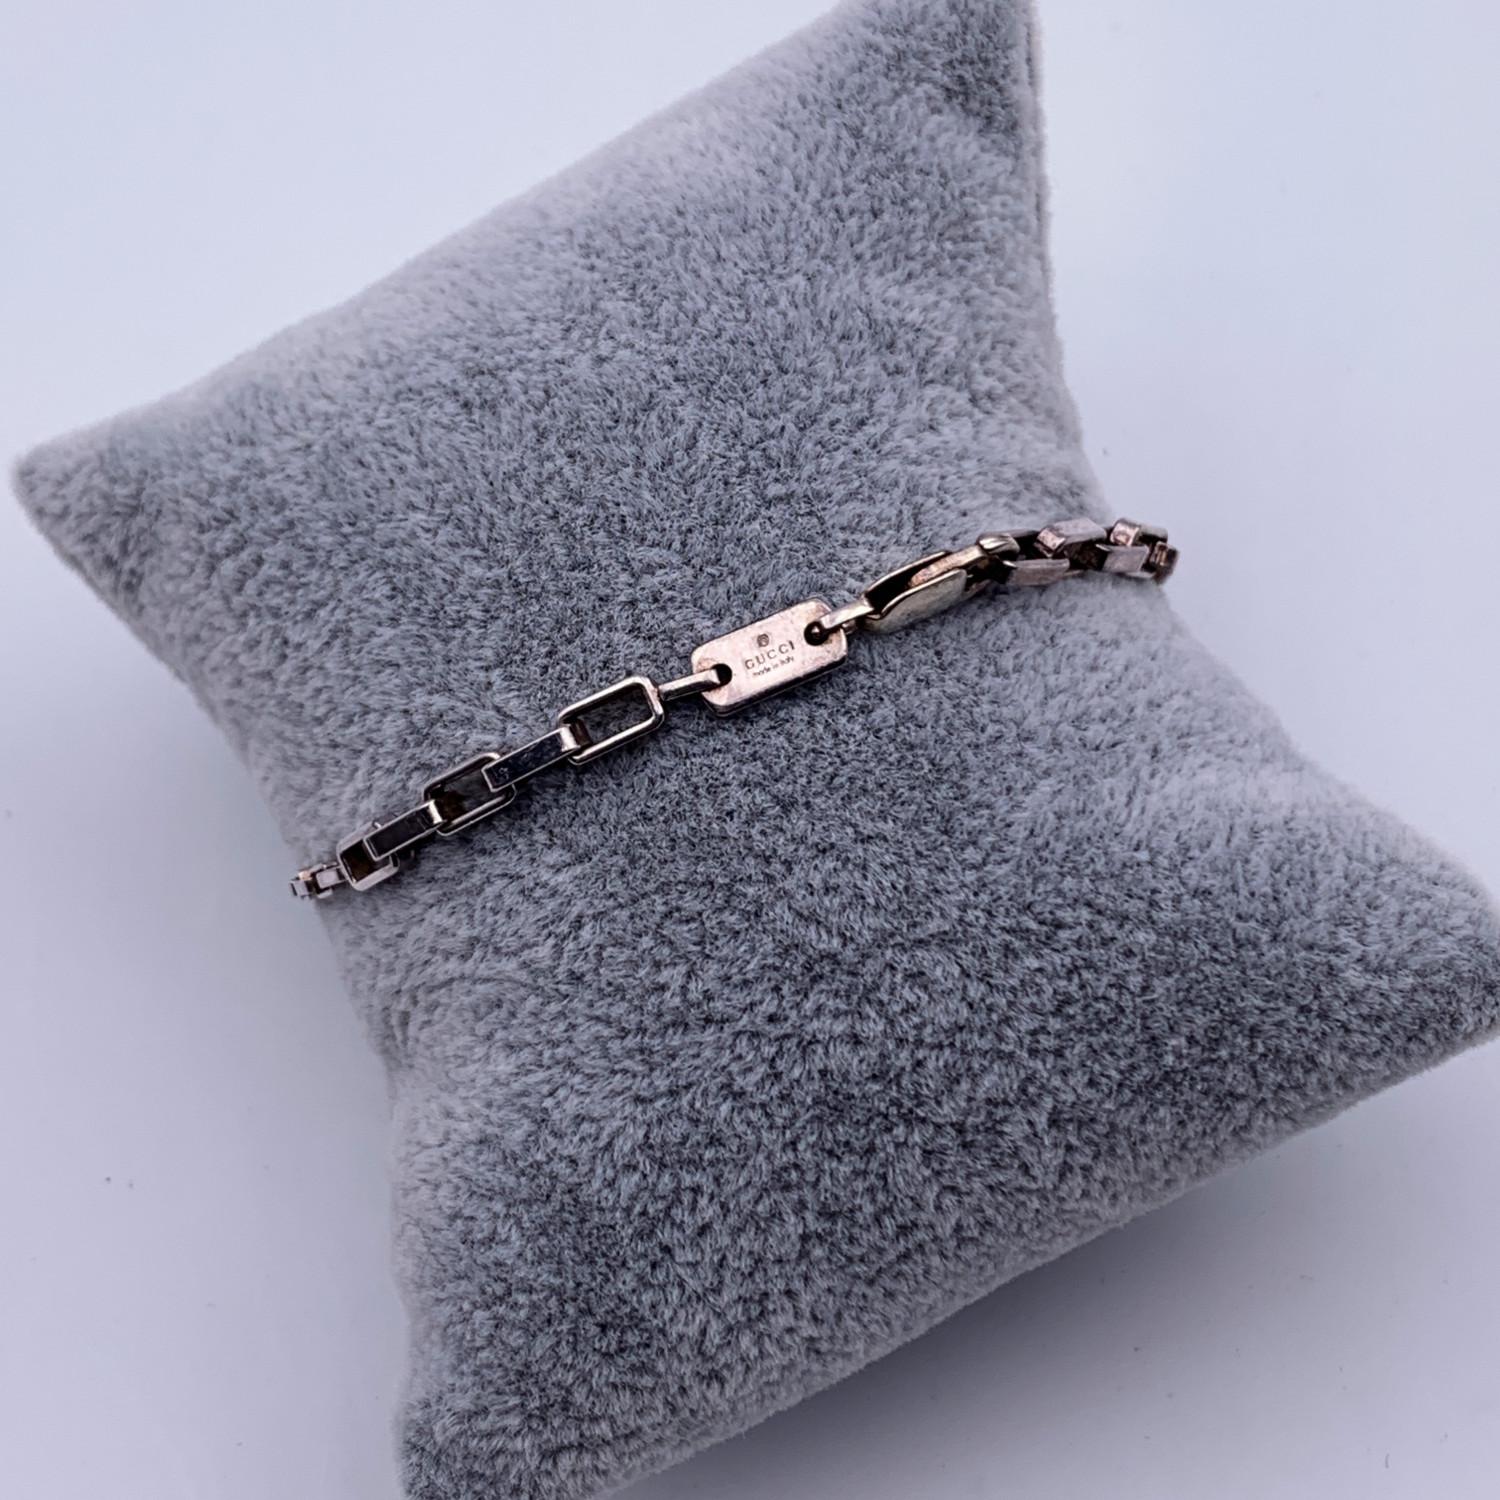 Classic Rectangle Chain link bracelet by Gucci. Made in sterling silver. 'Gucci - Made in Italy' plate in the center with engraved '925' hallmark on its reverse. Lobster closure. Total length: 6.75 inches - 17.2 cm

Condition

A - EXCELLENT

Gently